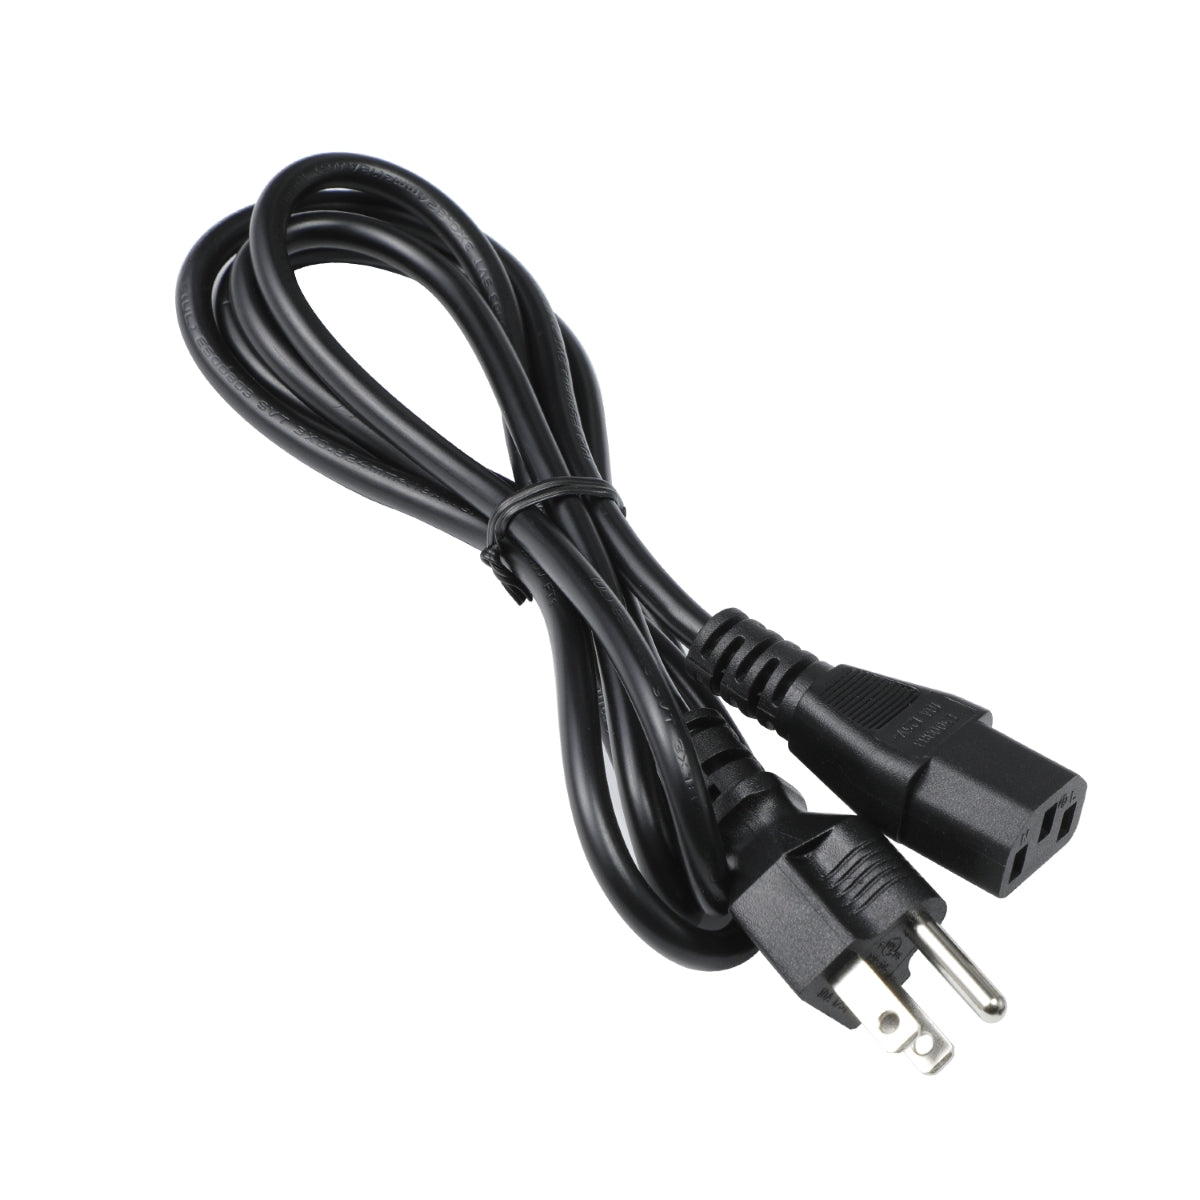 Power Cord for ViewSonic VG2449 Display Monitor.